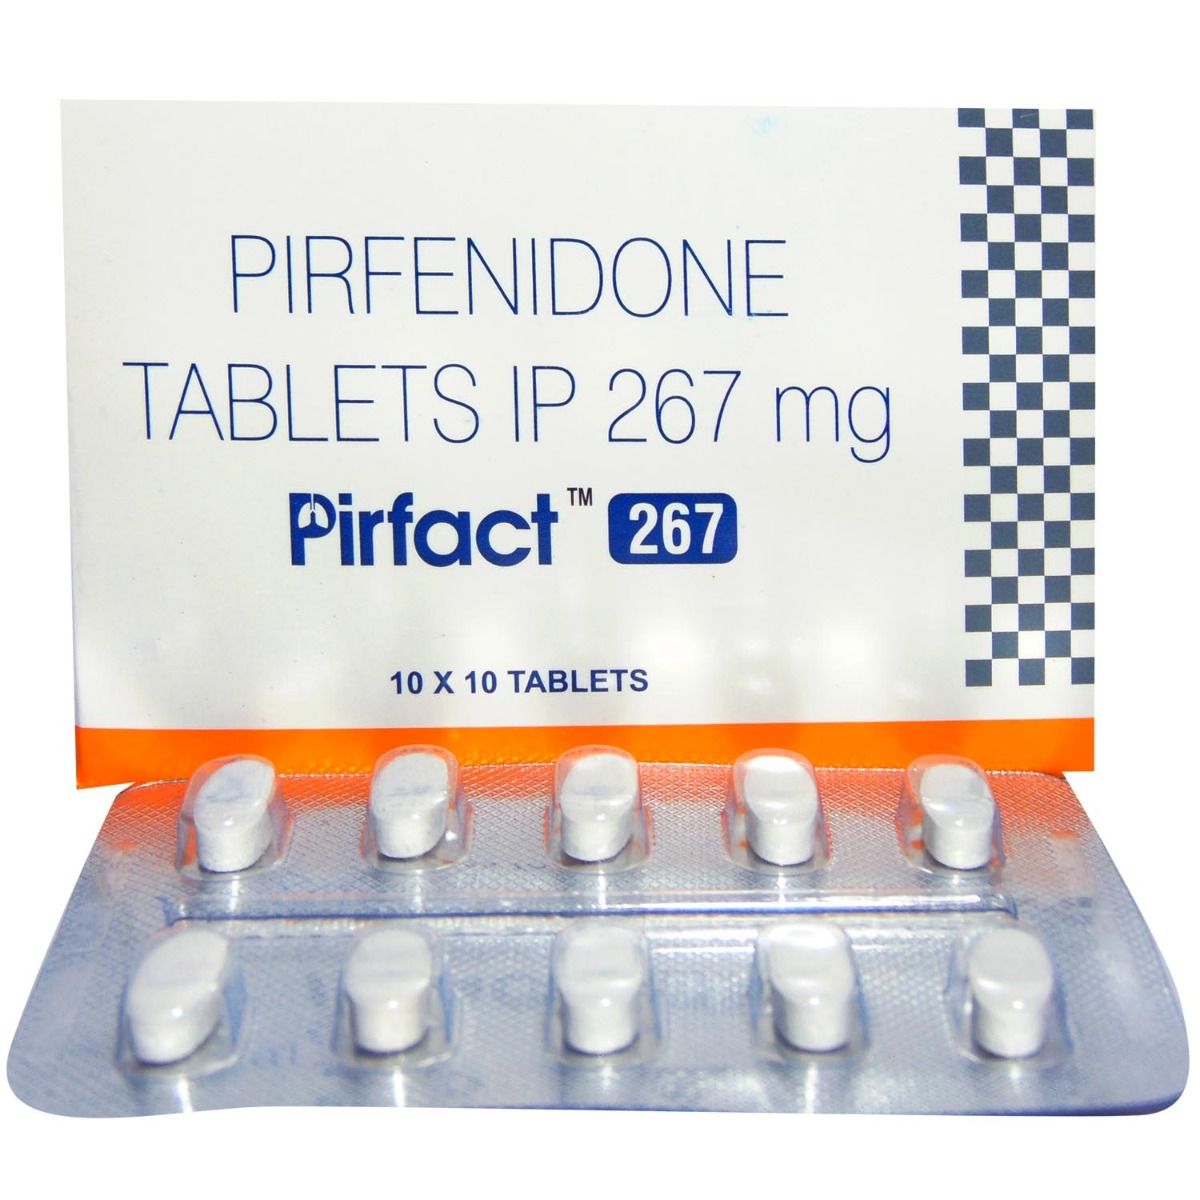 Pirfact 267 mg Tablet 10's, Pack of 10 TABLETS